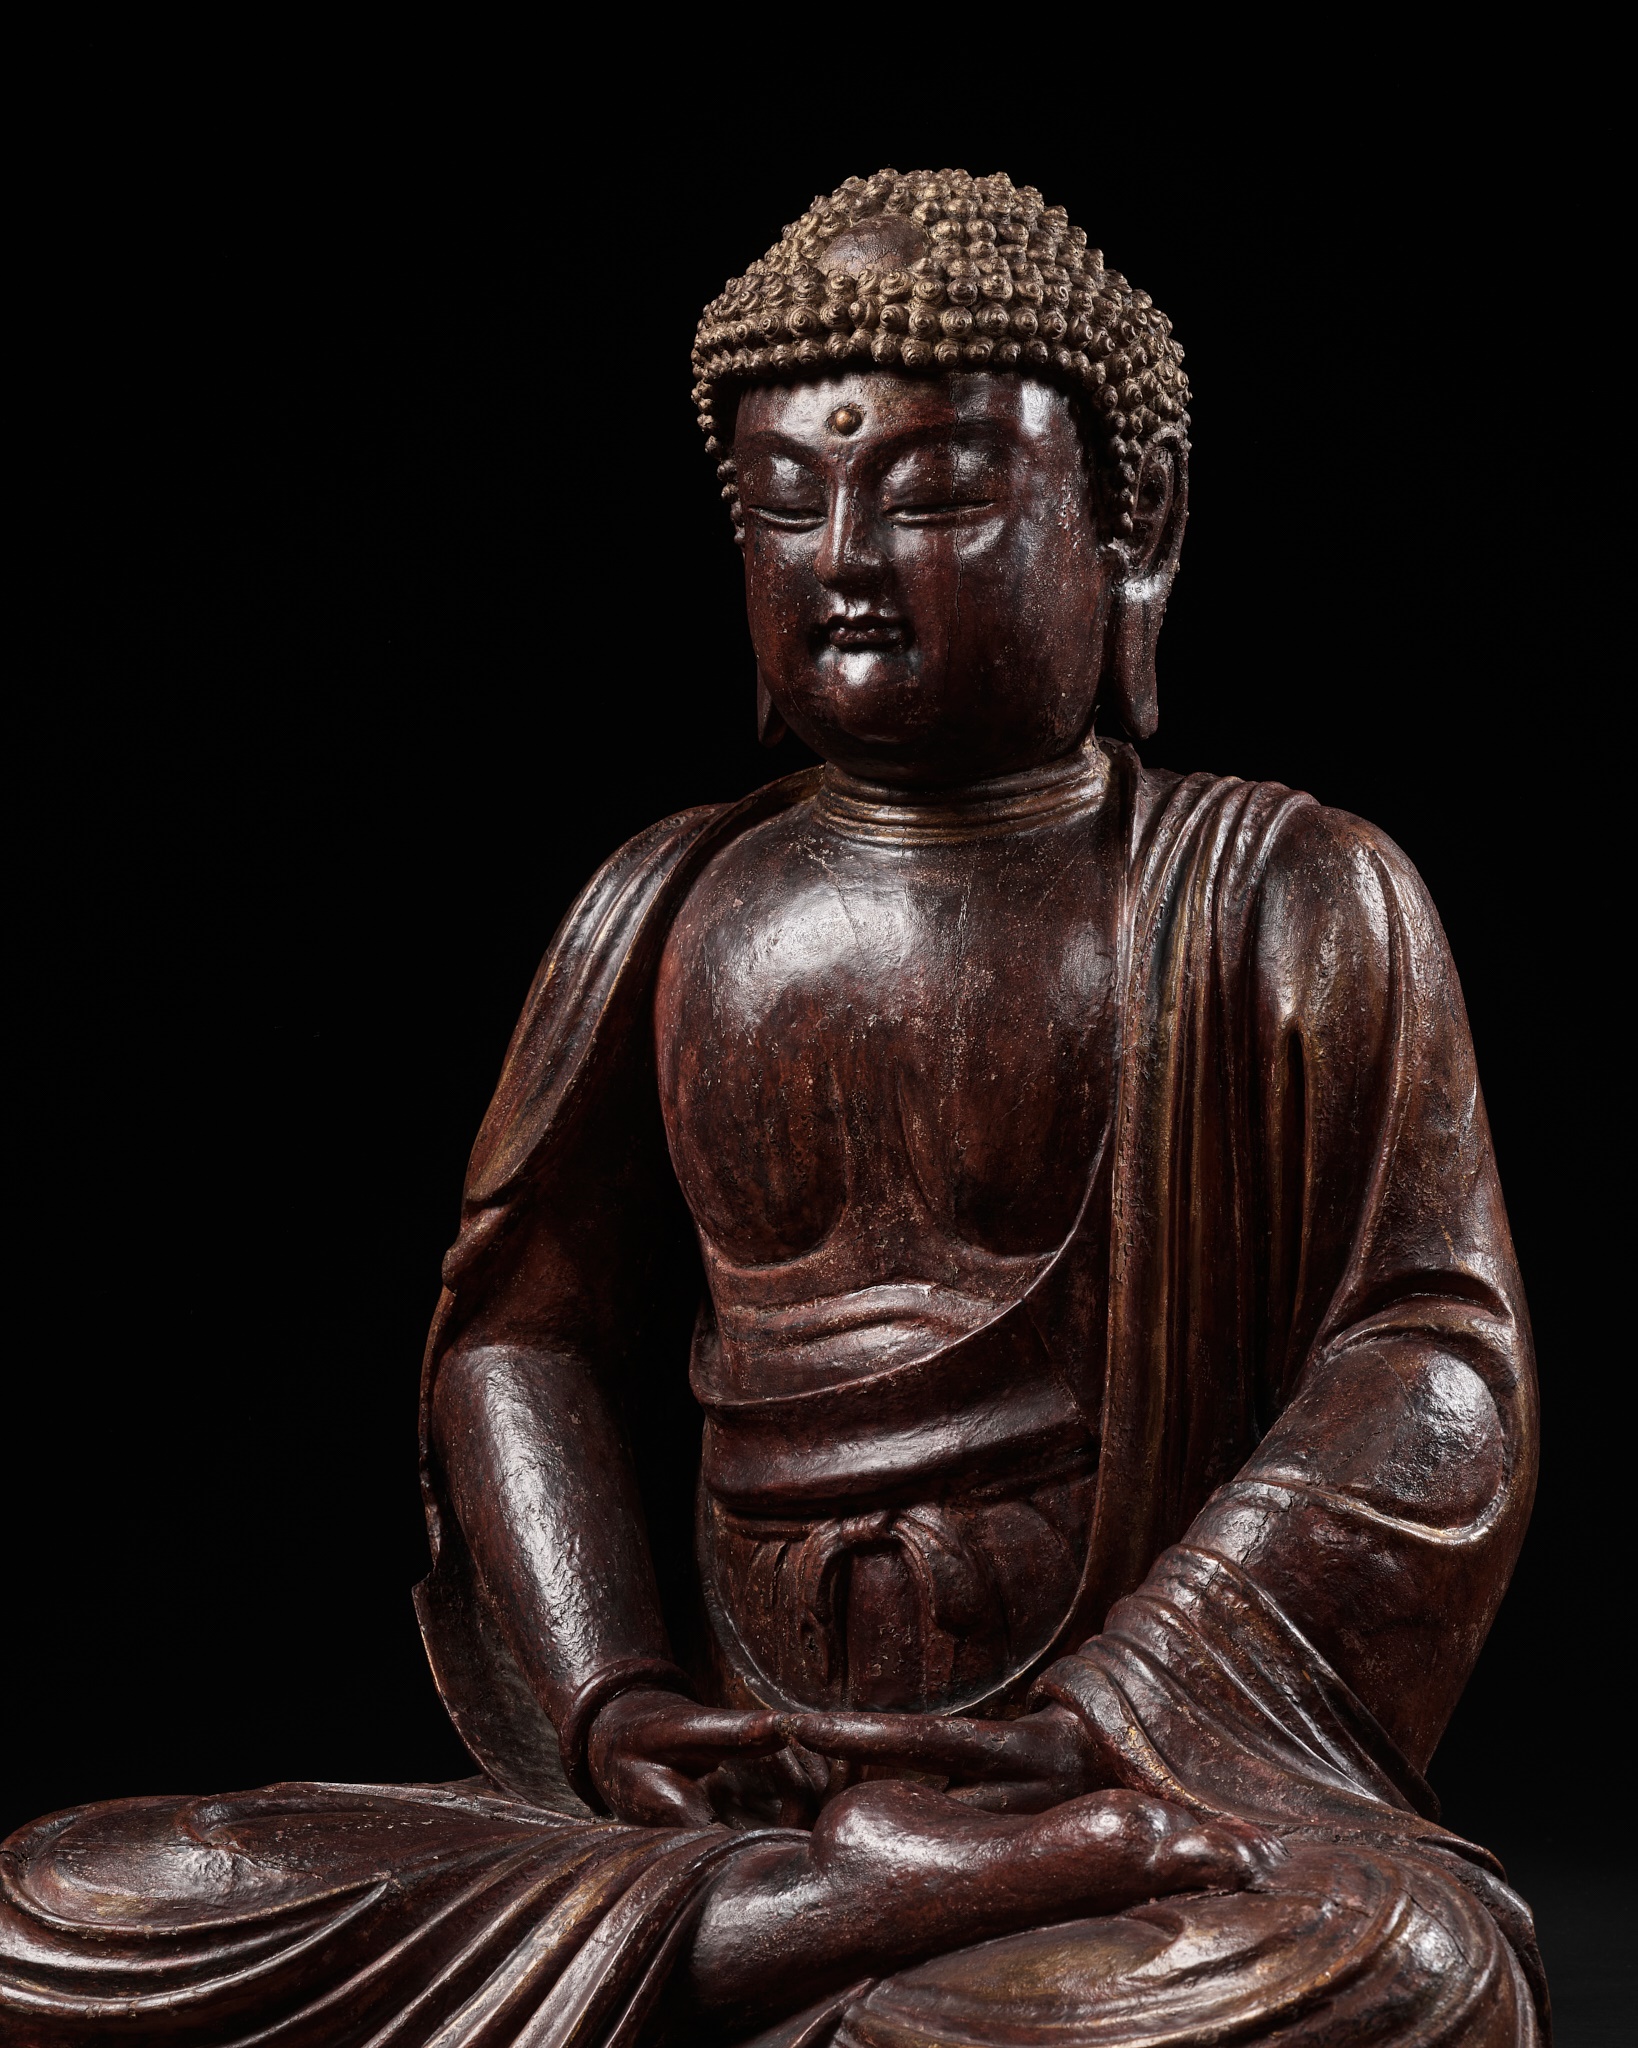 A LARGE LACQUERED WOOD FIGURE OF BUDDHA, LATE MING/EARLY QING DYNASTY, CIRCA 17TH CENTURY